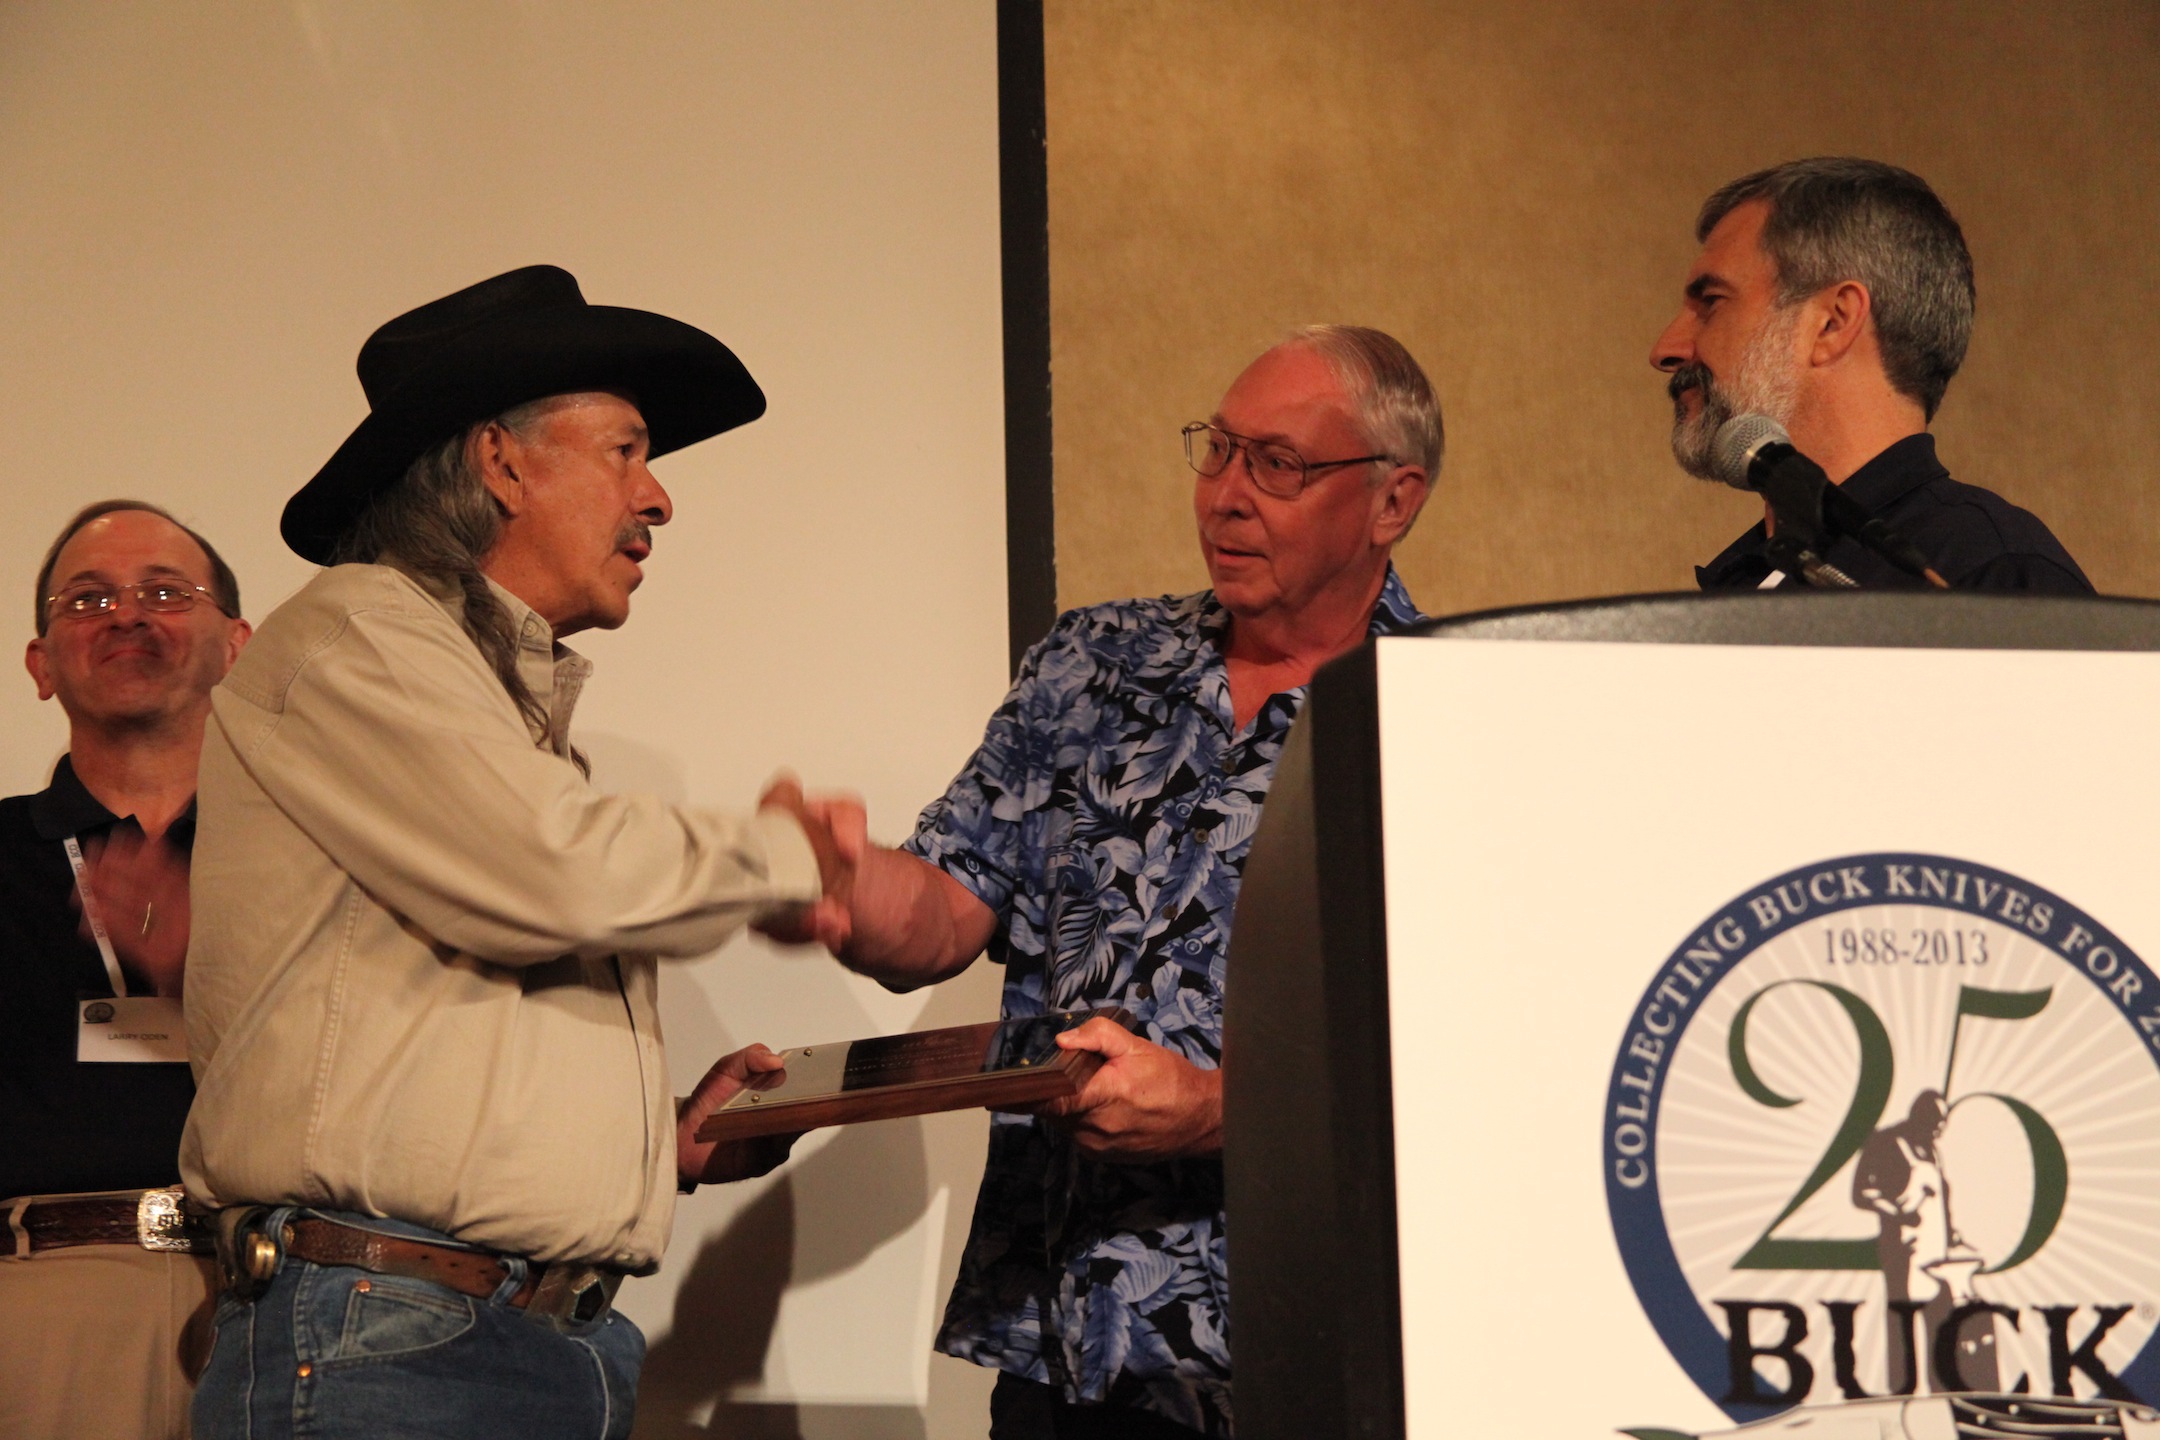 David Yellowhorse enters the Buck Collectors Club during the Buck Collectors Silver Anniversary gala. From left: Larry Oden, David Yellowhorse, Gene Merritt and John Foresman.